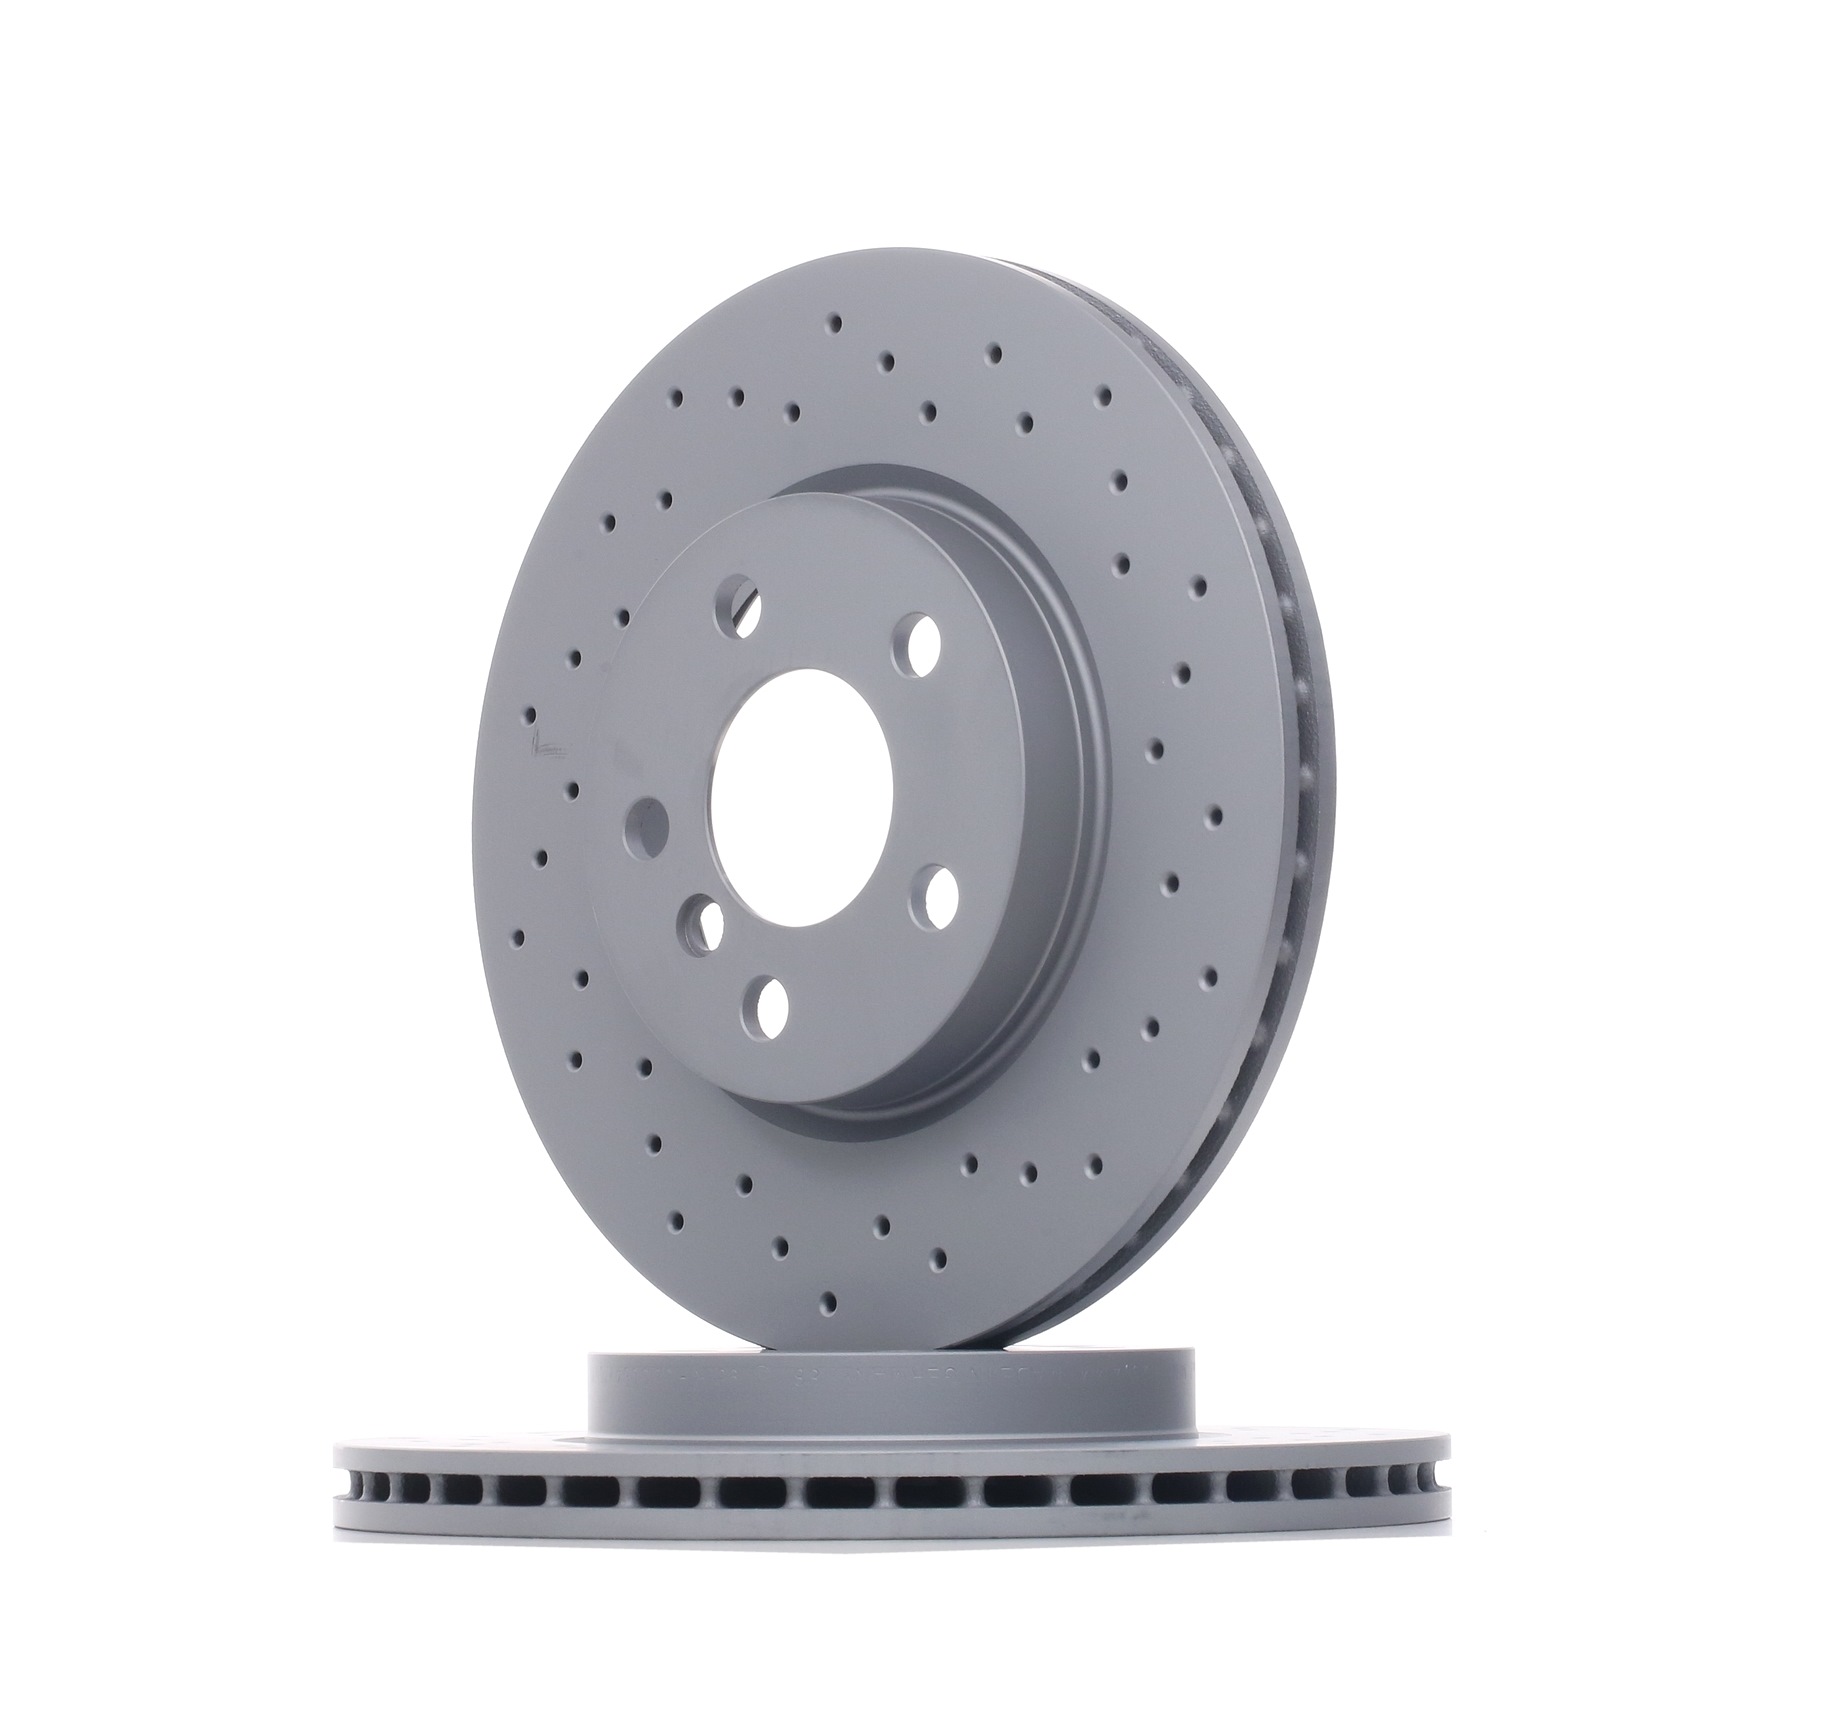 ZIMMERMANN SPORT COAT Z 150.2927.52 Brake disc 294x22mm, 6/5, 5x112, internally vented, Perforated, Coated, High-carbon